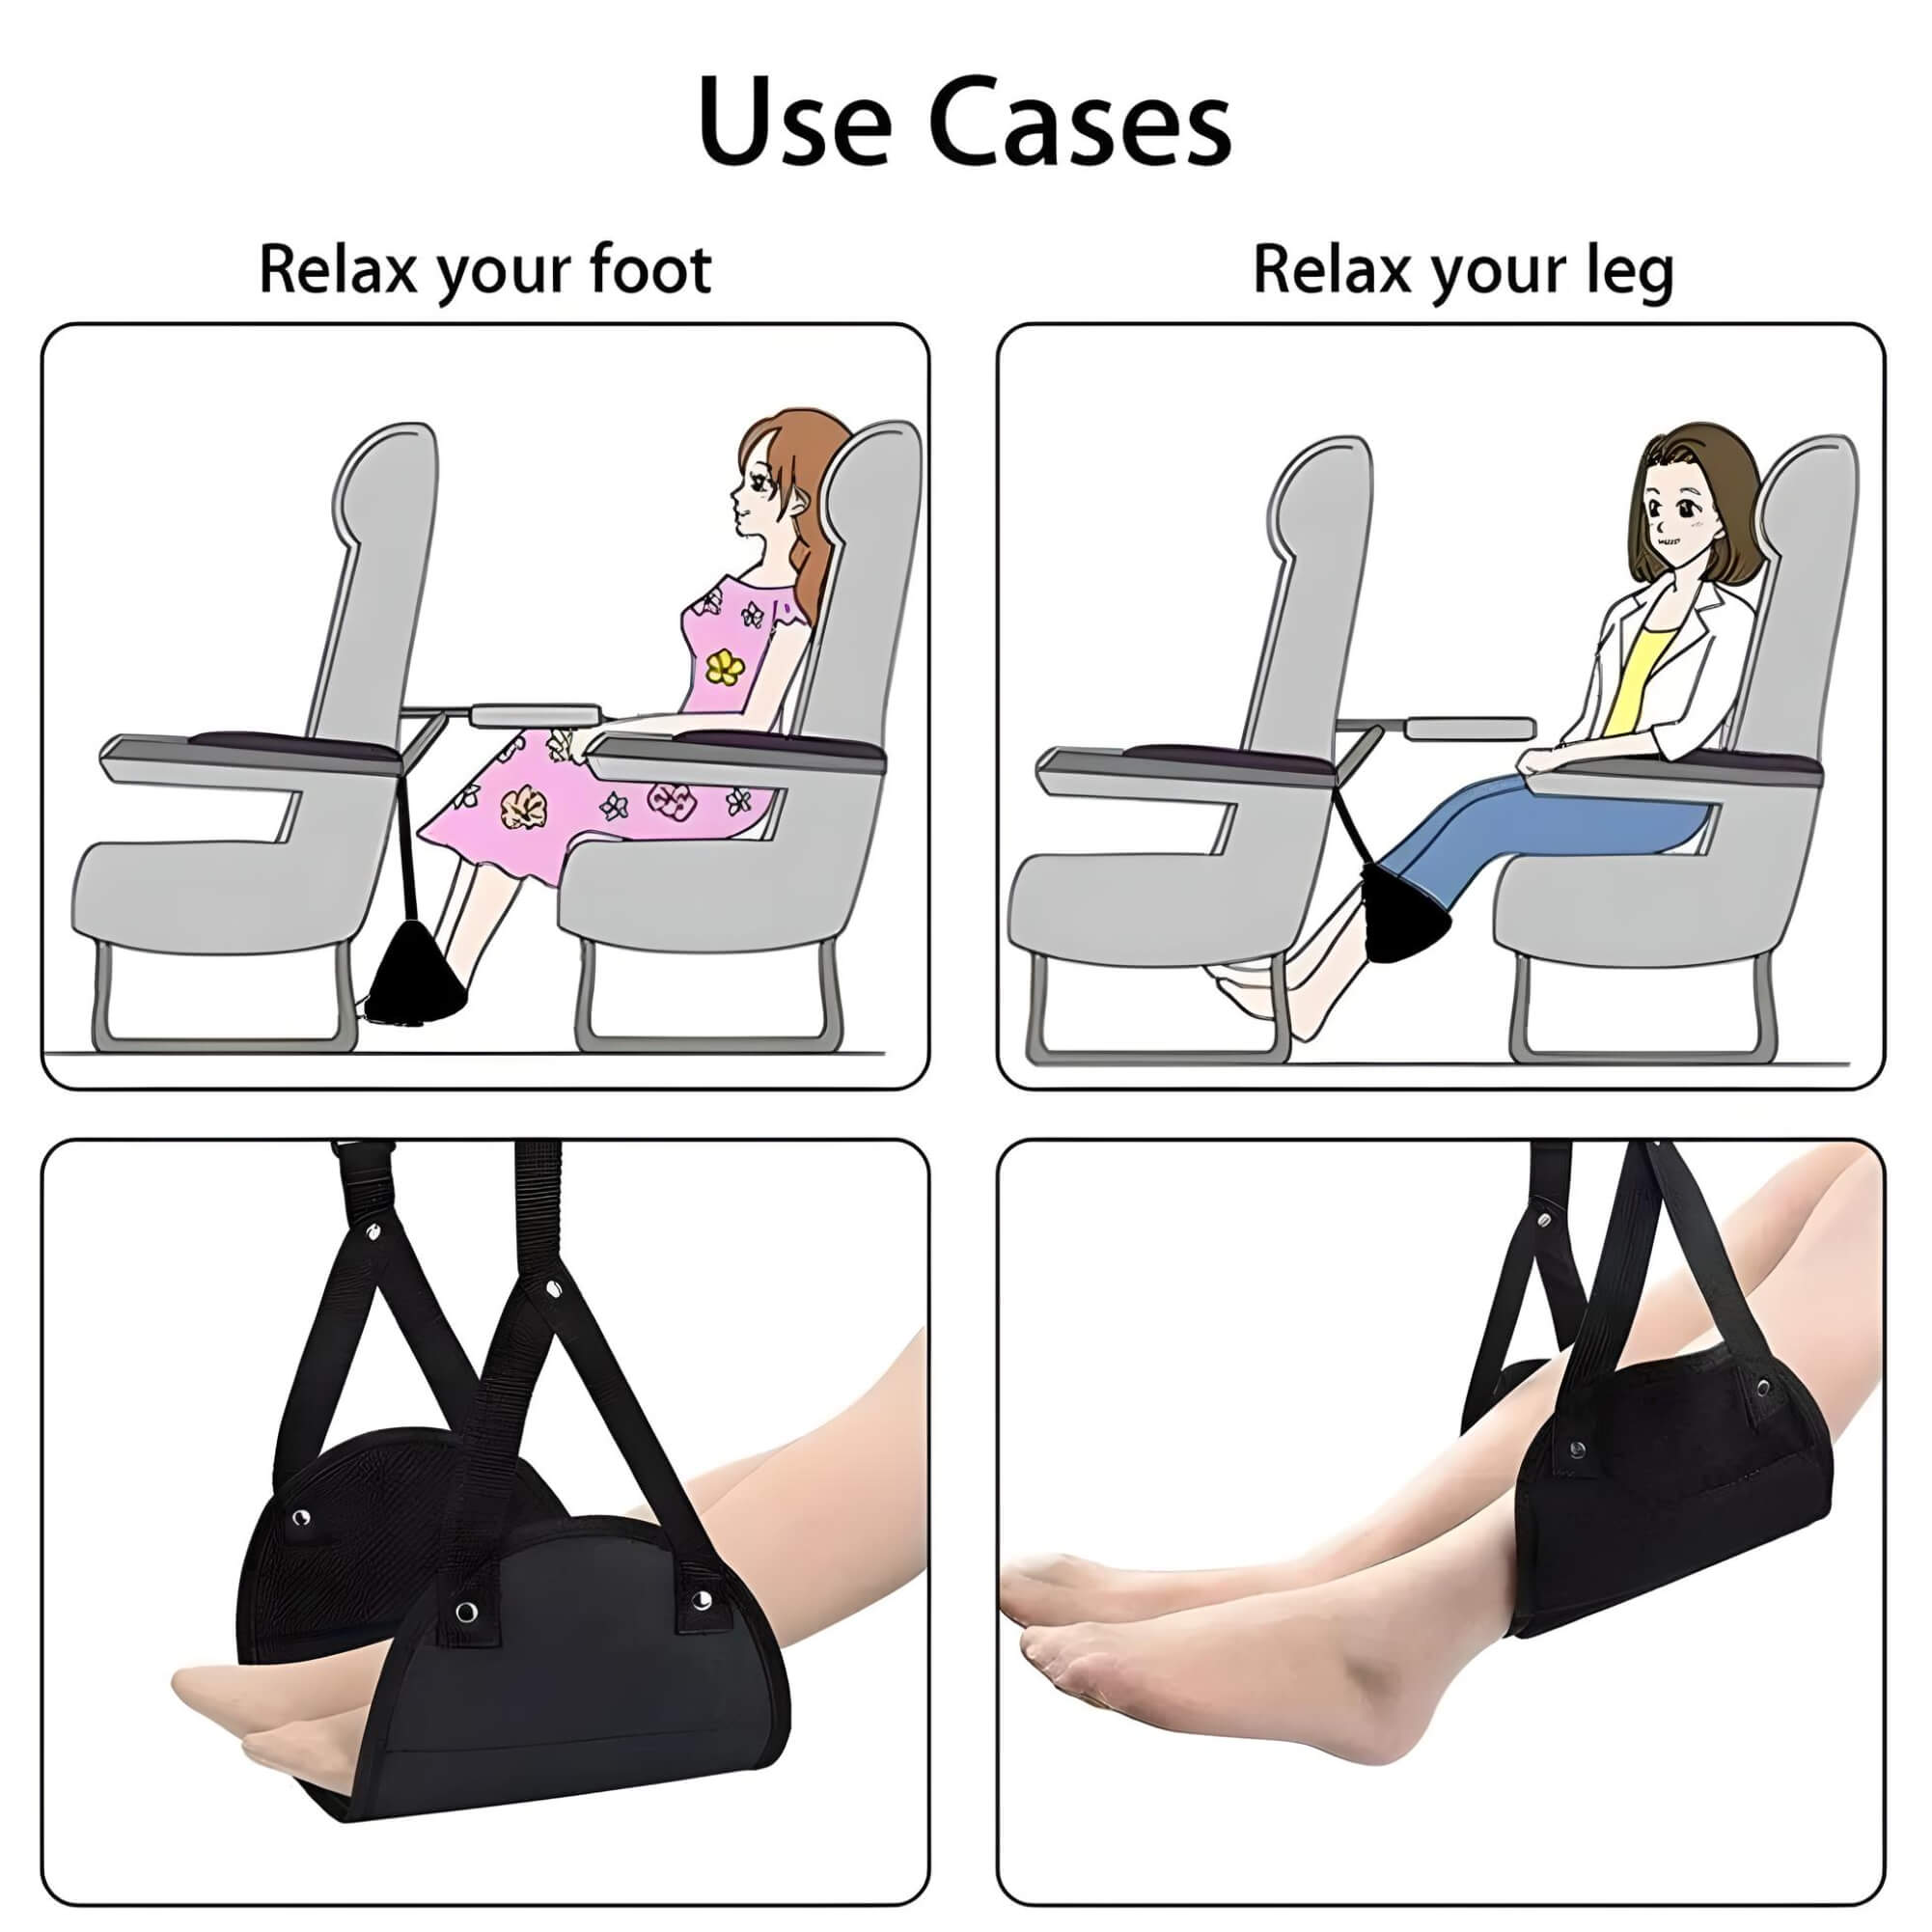 airplane-foot-rest-hammock-use-cases